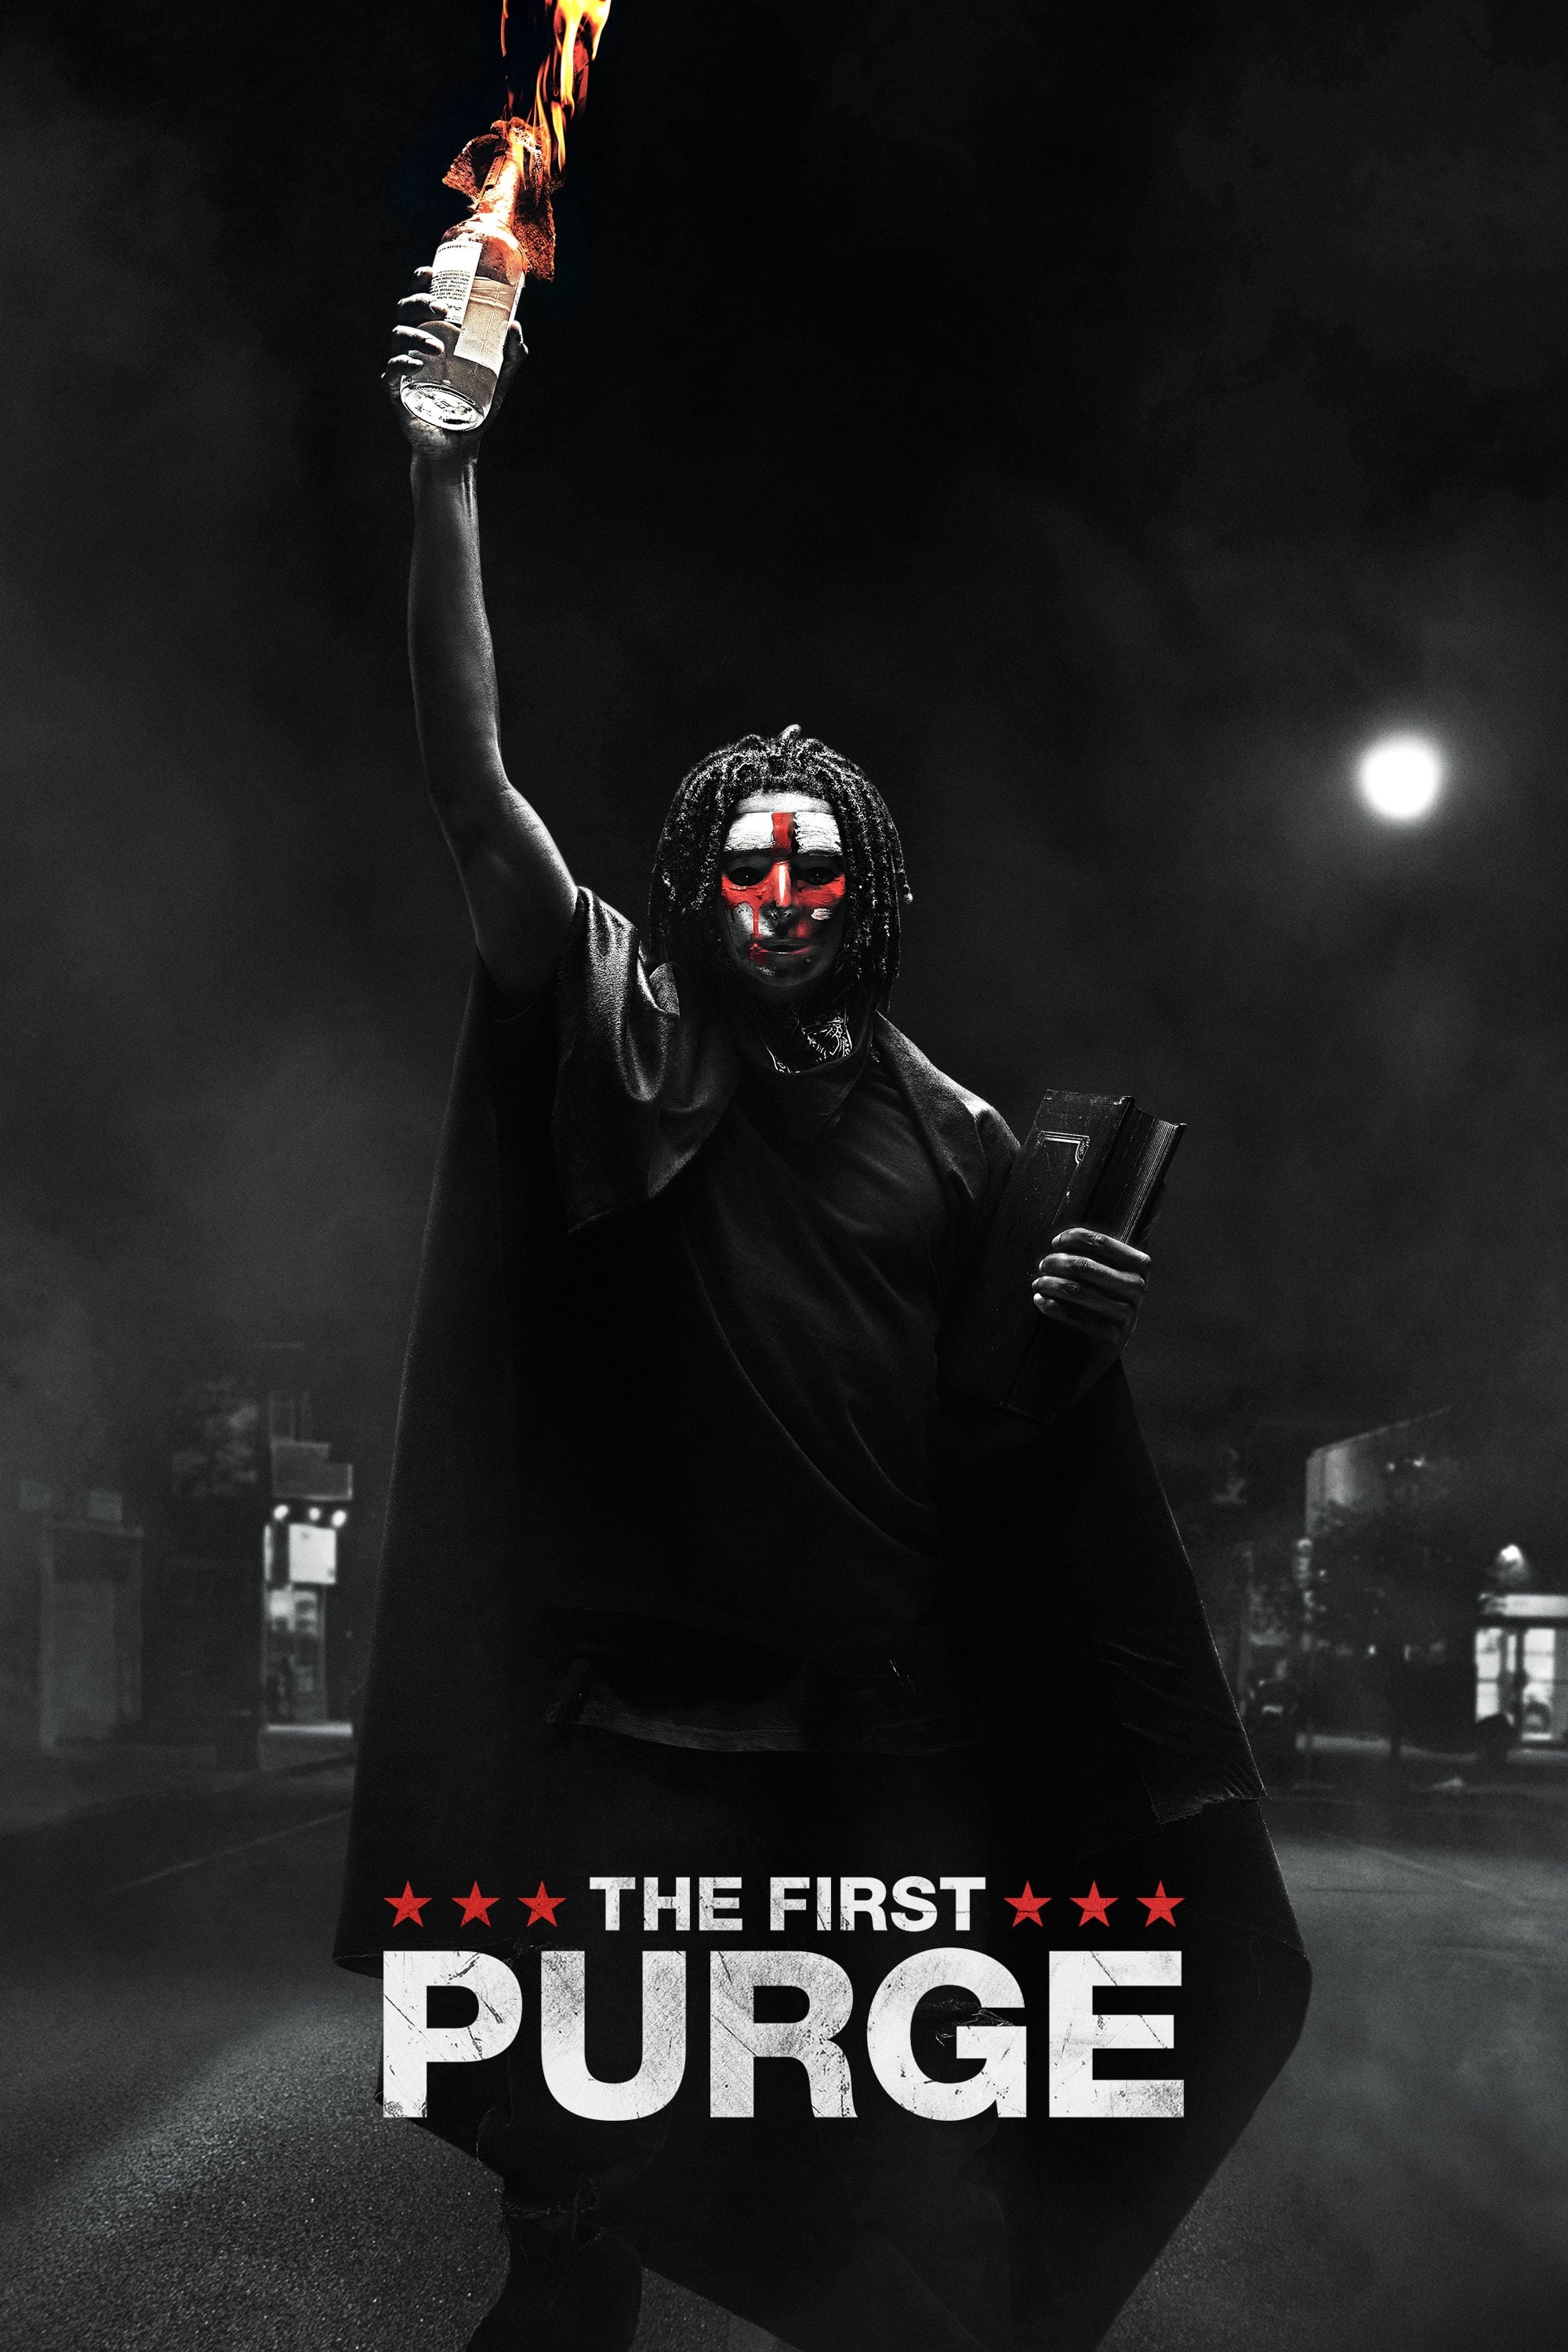 NETFLIX - The First Purge (2018) 640Kbps 23Fps DD+ 6Ch TR NF Audio SHS - When Is The First Purge Coming To Netflix